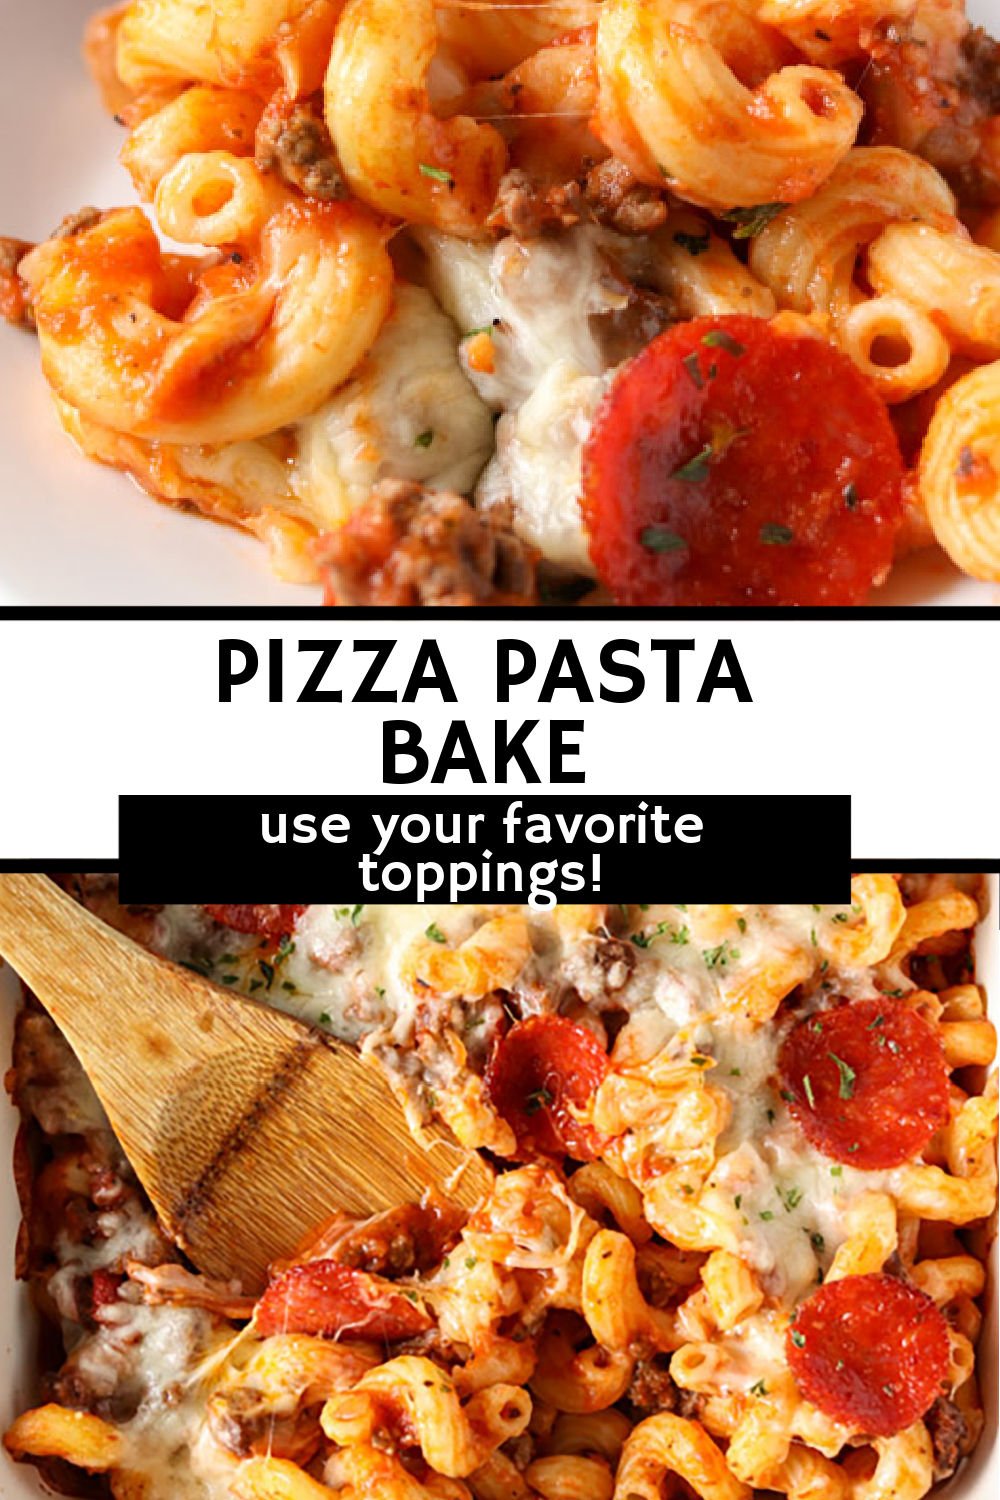 This delicious Pizza Pasta Bake takes everything you love about pizza and puts it into casserole form. Use your favorite toppings - we opt for traditional pepperoni - to make an easy meal that the whole family will love!  | www.persnicketyplates.com